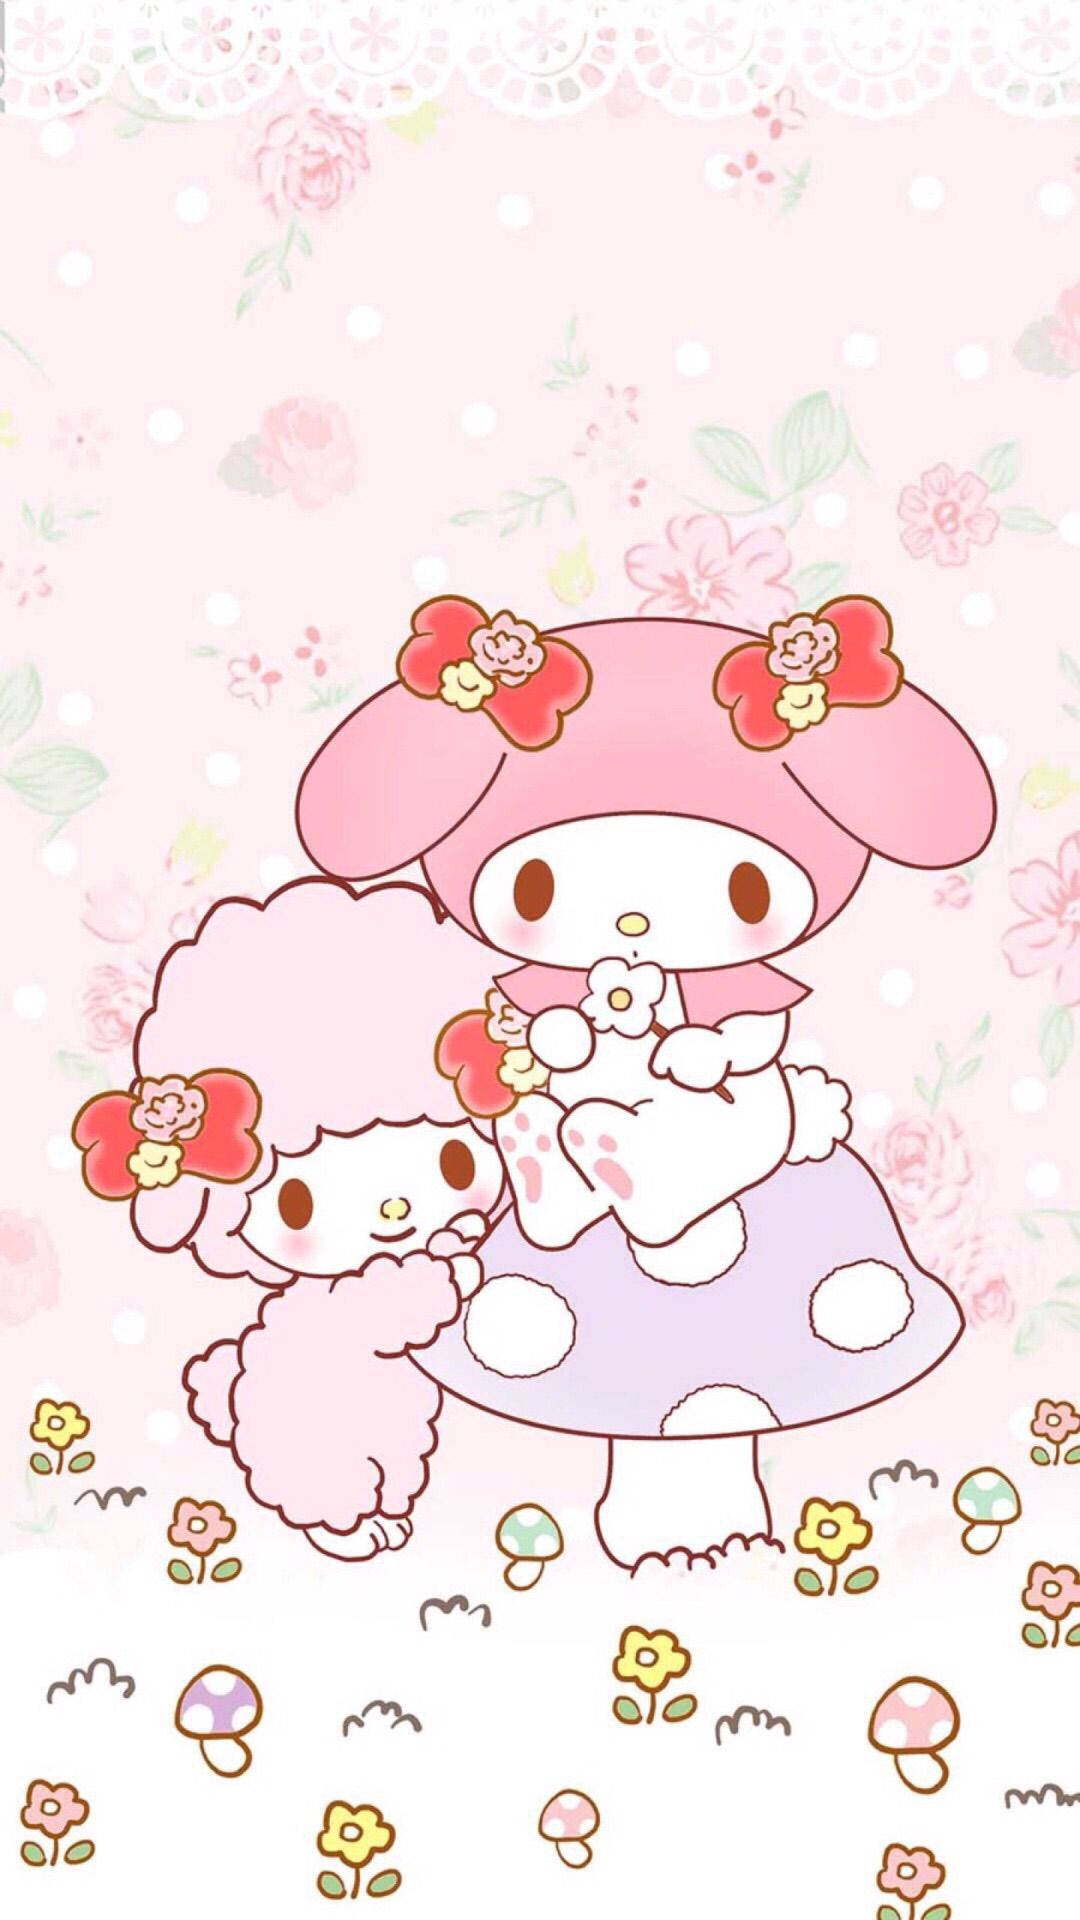 Free My Melody Wallpaper Downloads, [200+] My Melody Wallpapers for FREE |  Wallpapers.com